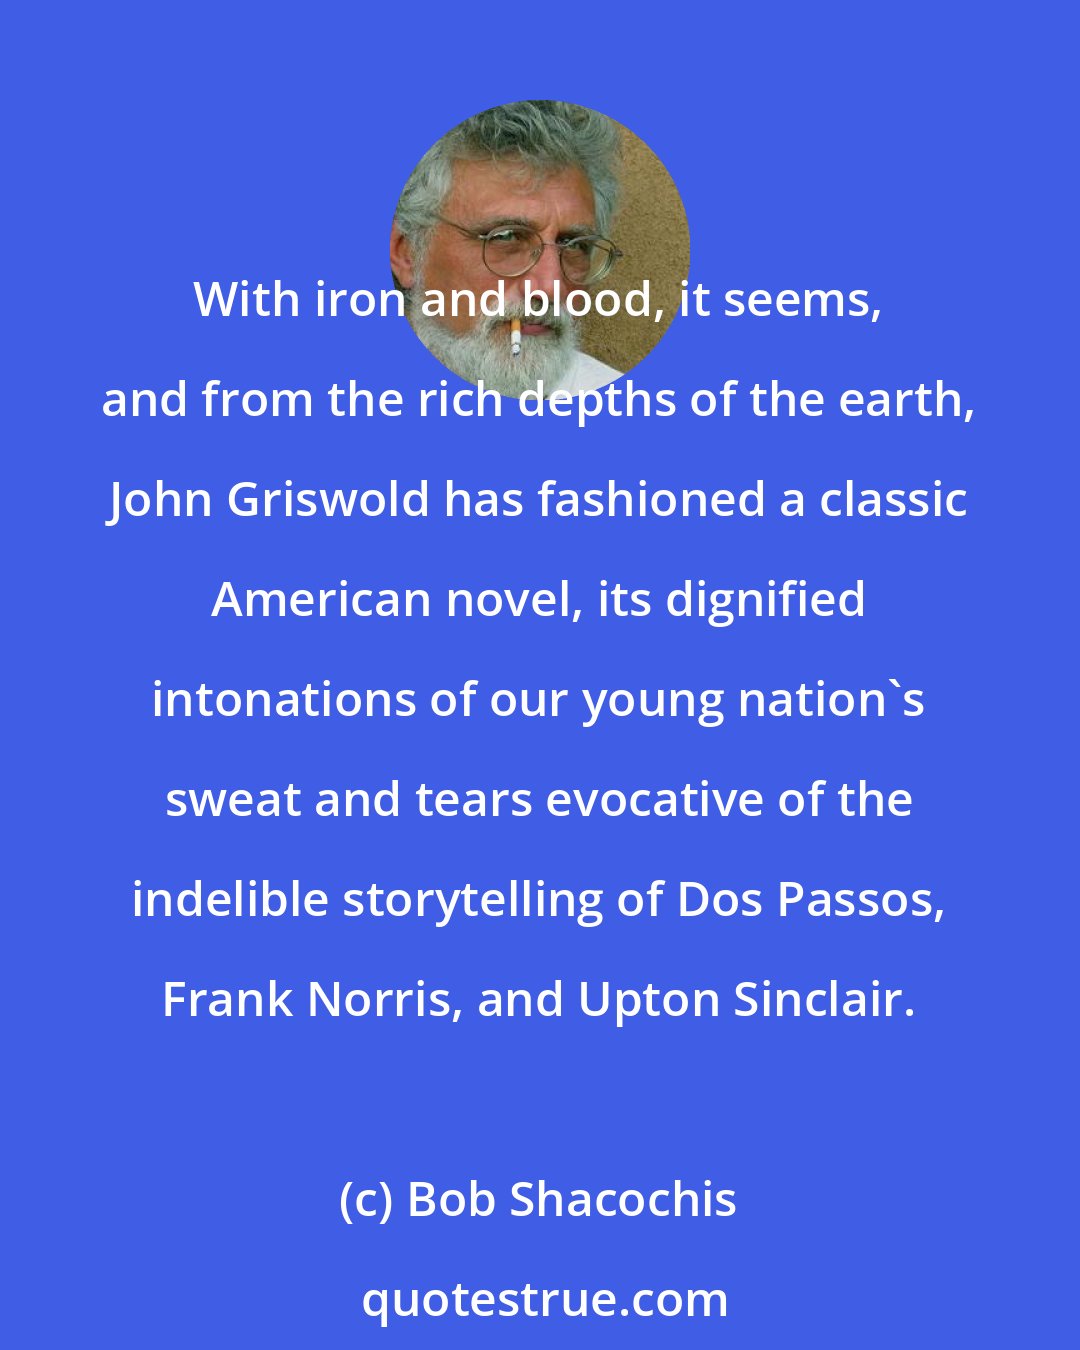 Bob Shacochis: With iron and blood, it seems, and from the rich depths of the earth, John Griswold has fashioned a classic American novel, its dignified intonations of our young nation's sweat and tears evocative of the indelible storytelling of Dos Passos, Frank Norris, and Upton Sinclair.